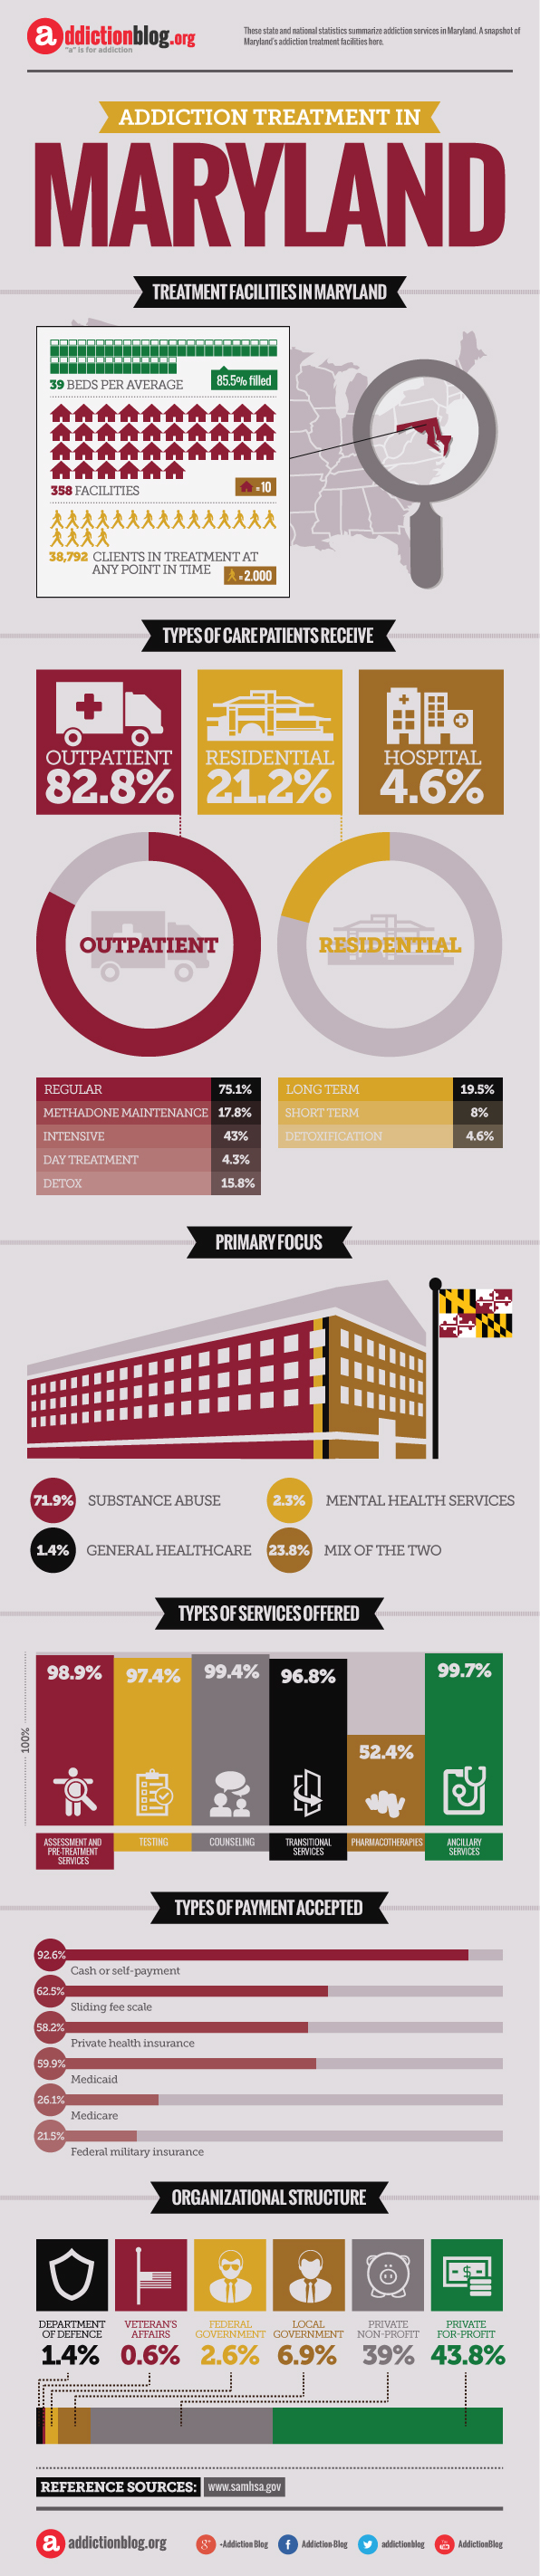 Drug rehab centers in Maryland (INFOGRAPHIC)